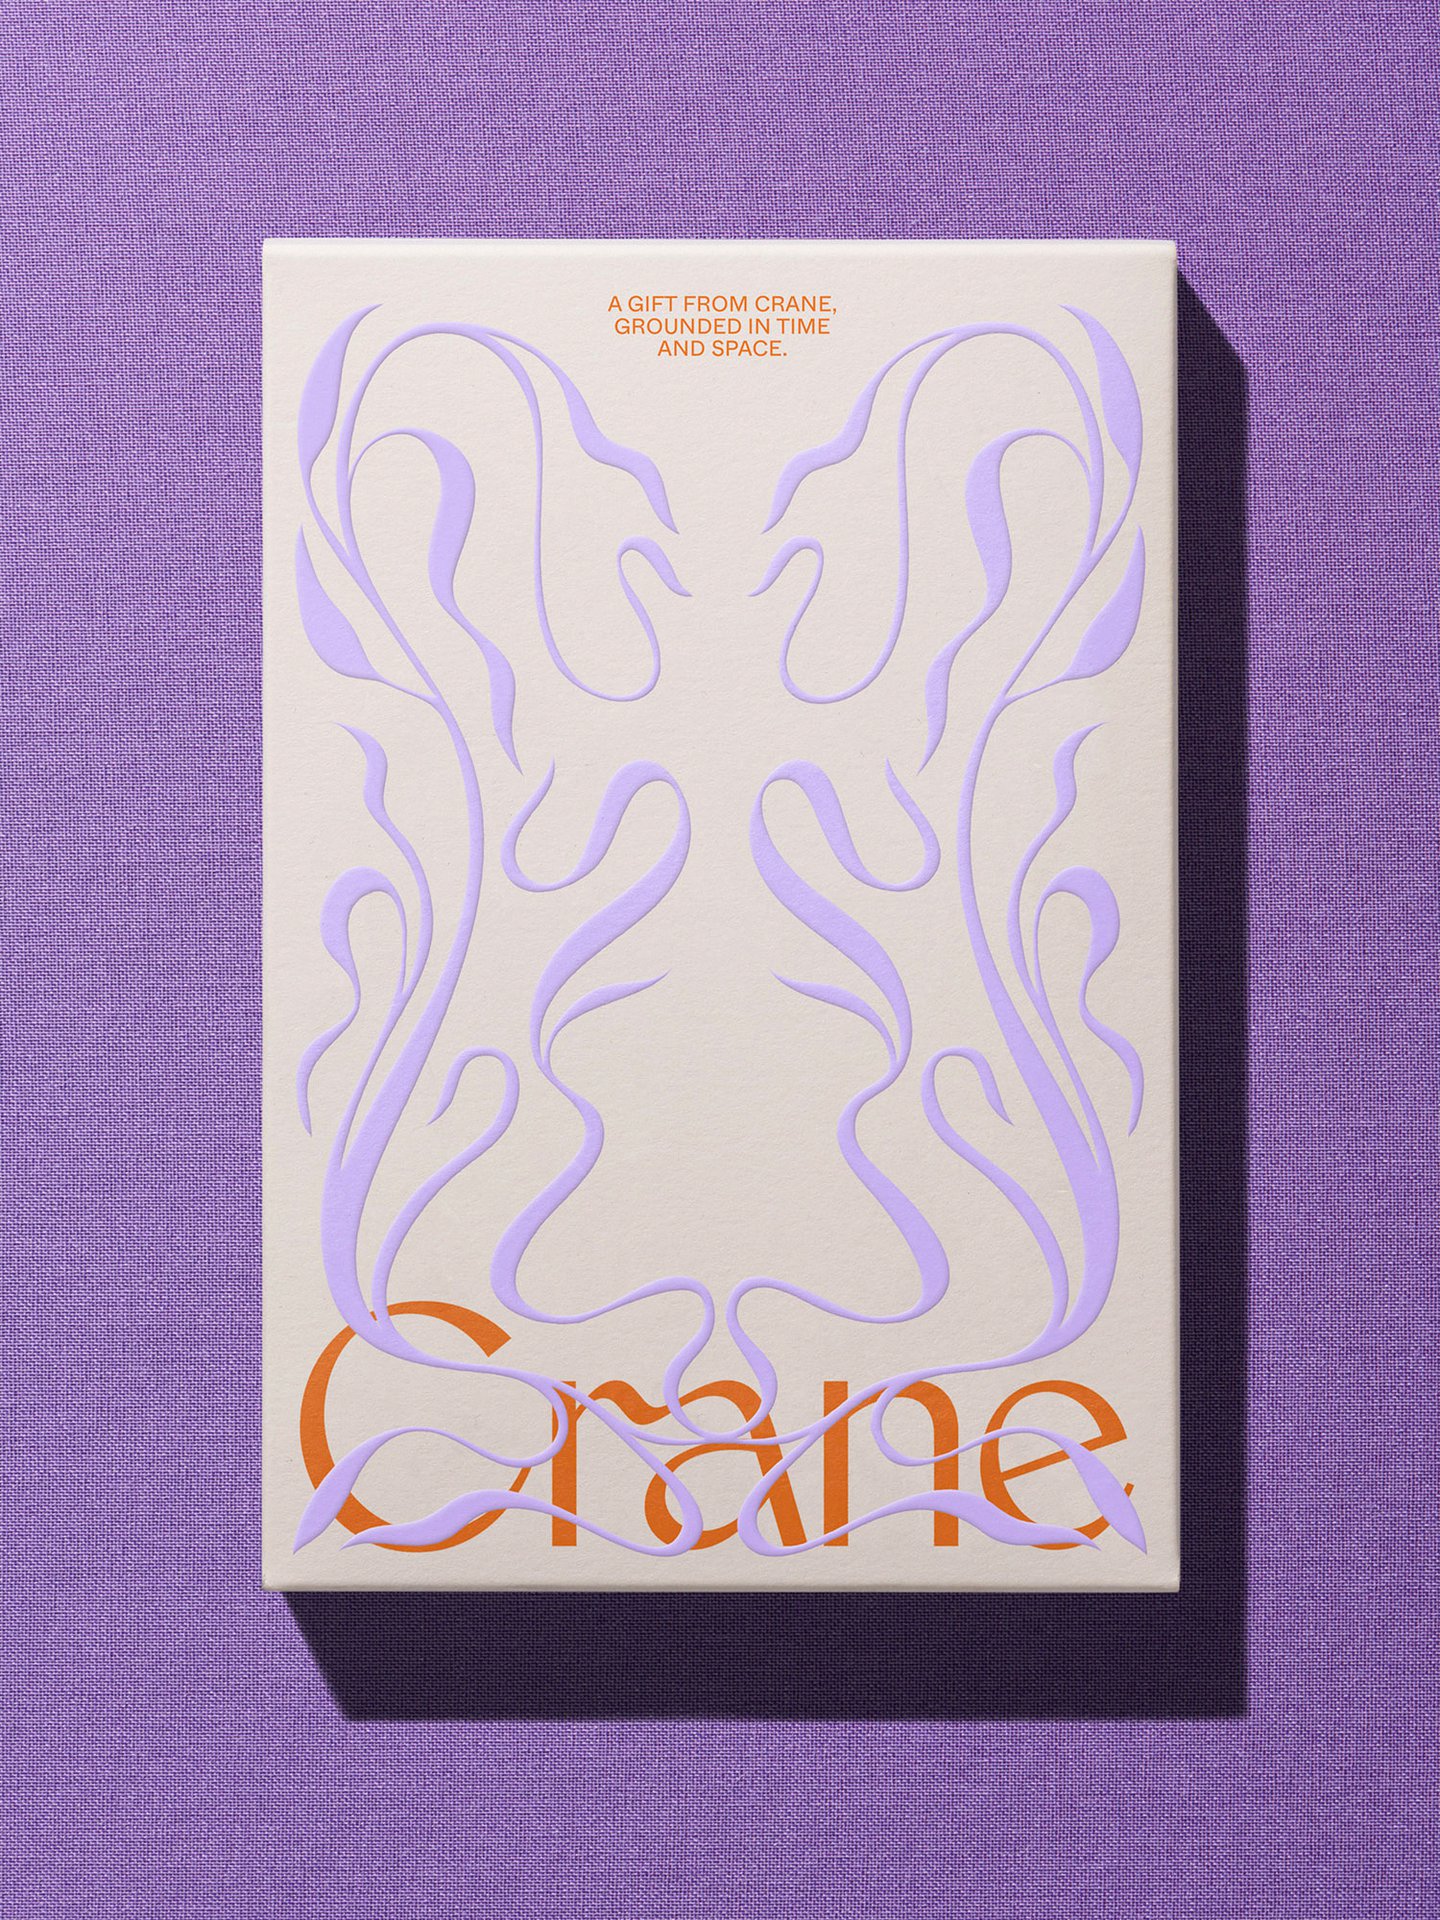 The Crane Paper Company rebrand by Collins looks to Art Nouveau